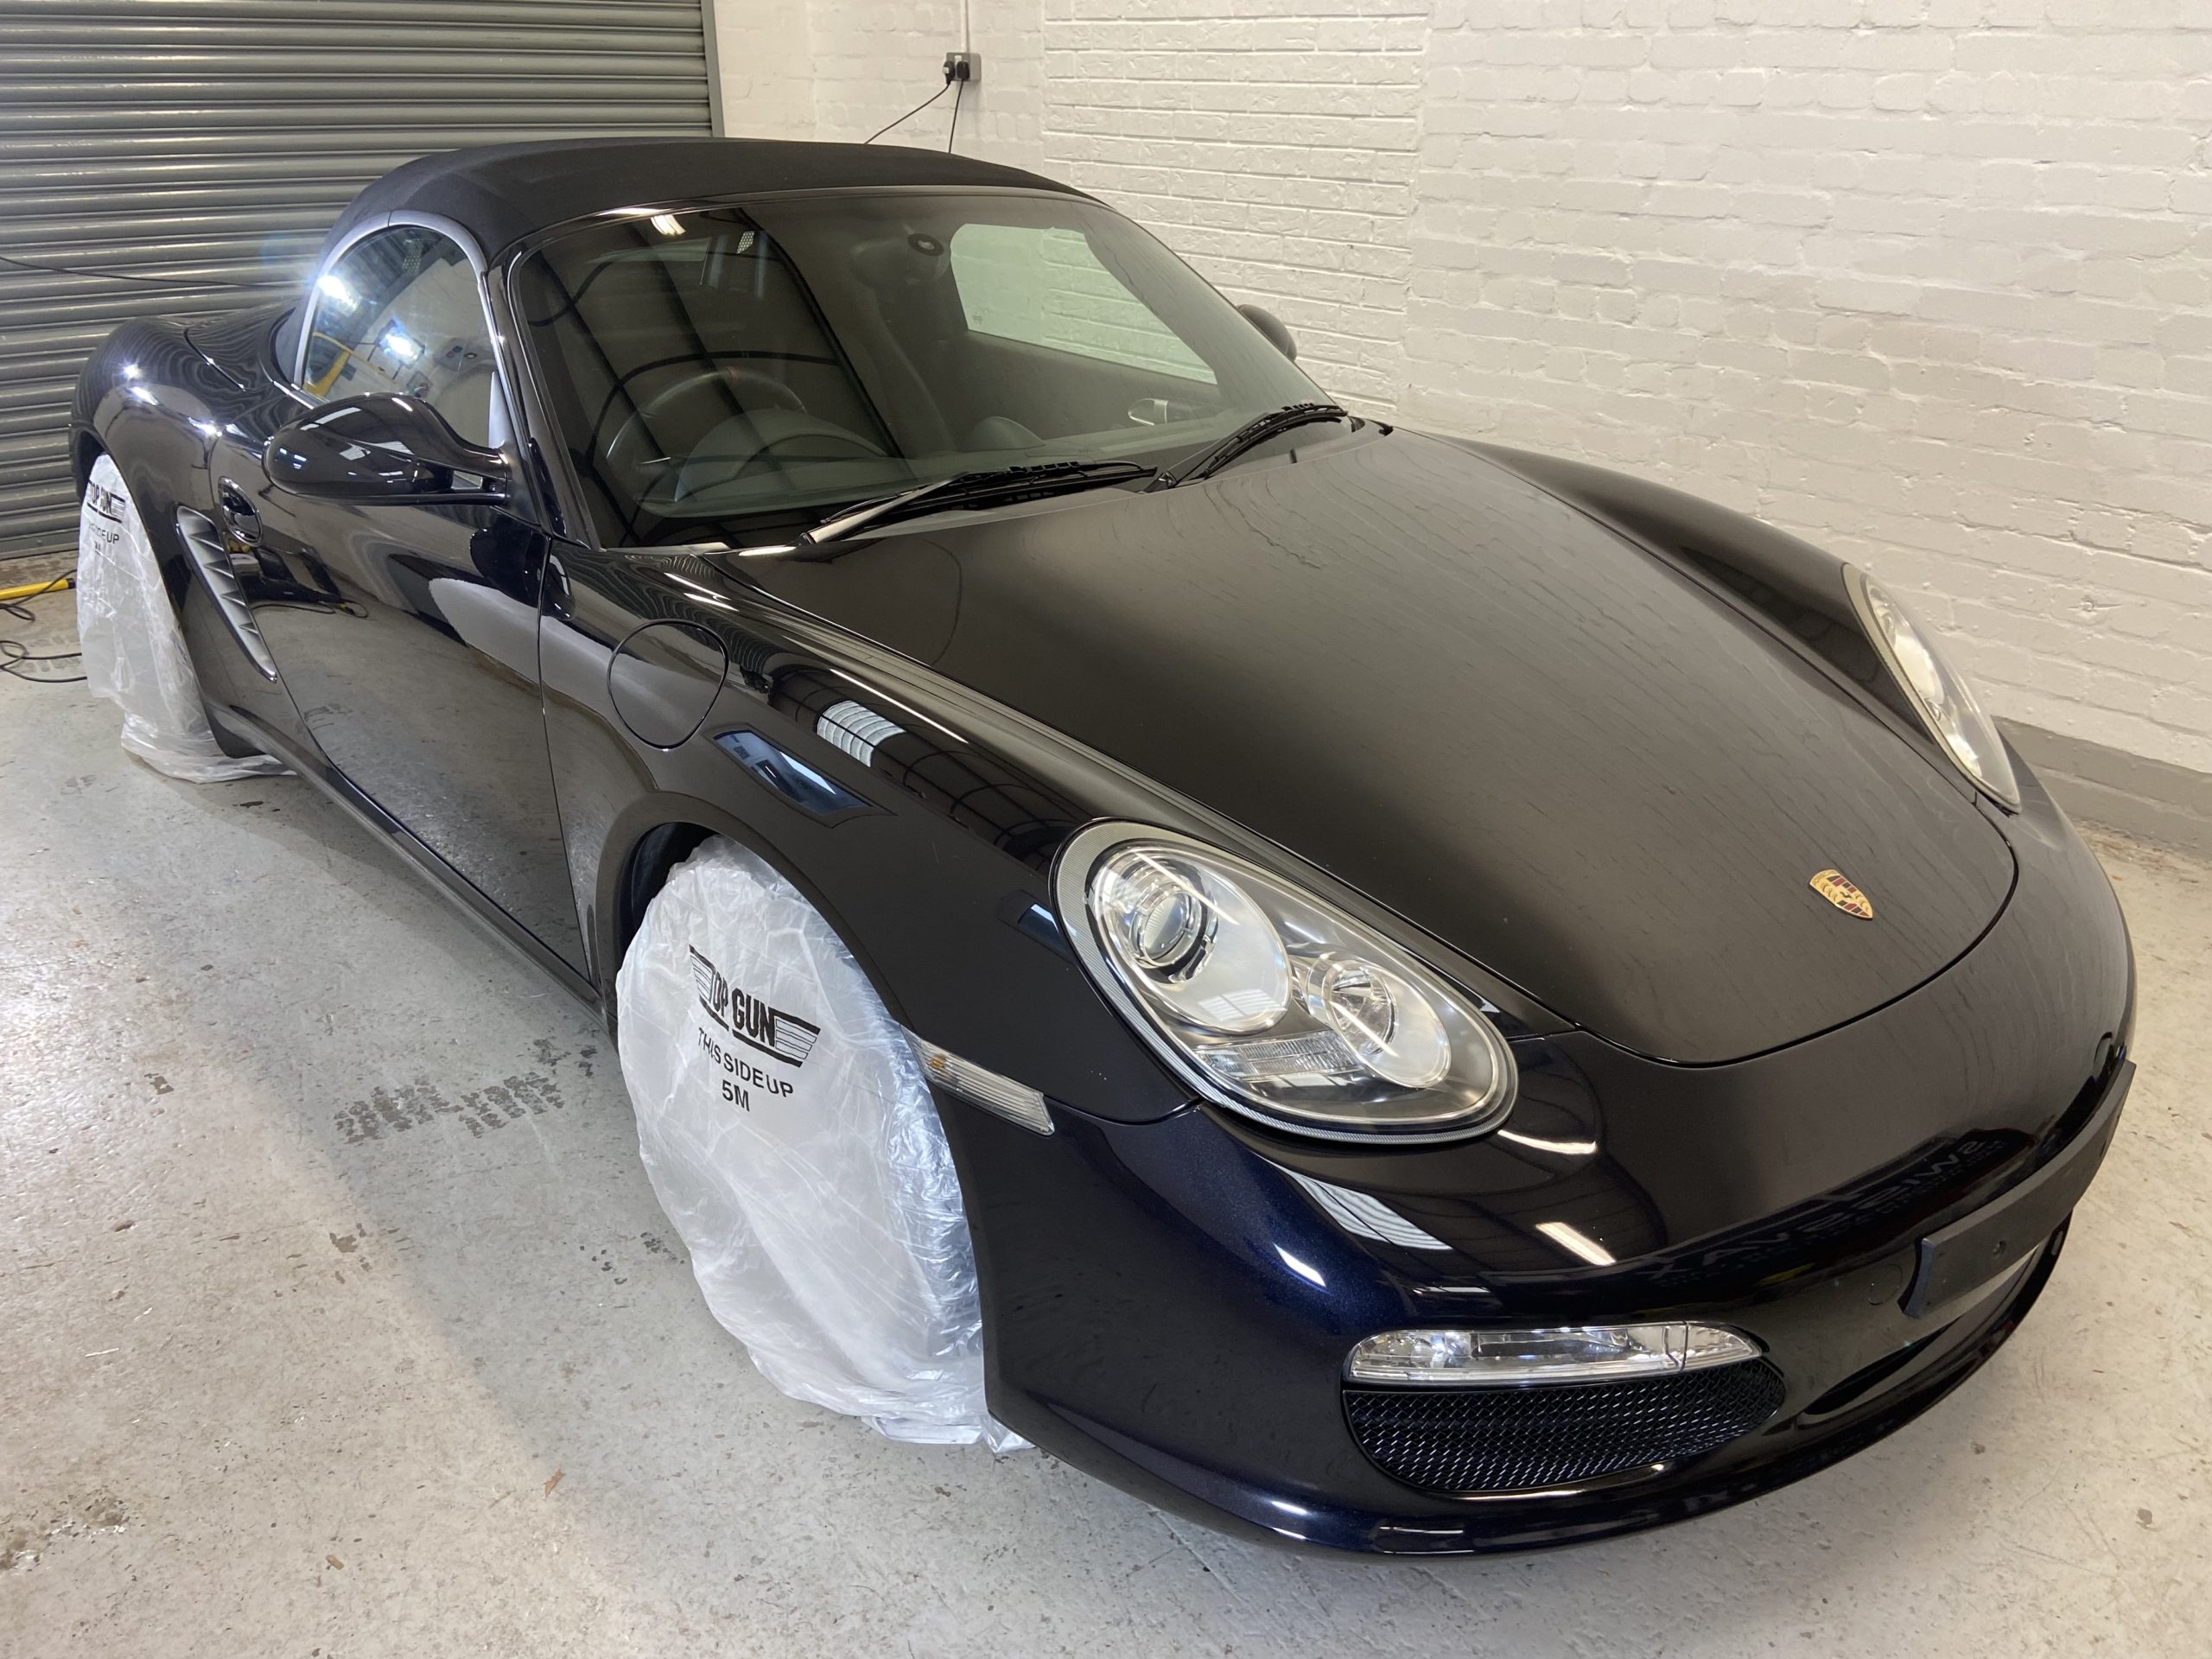 2009 Porsche Boxster S Manual 2 Stage machine polish 5 year 3 layer ceramic coating system